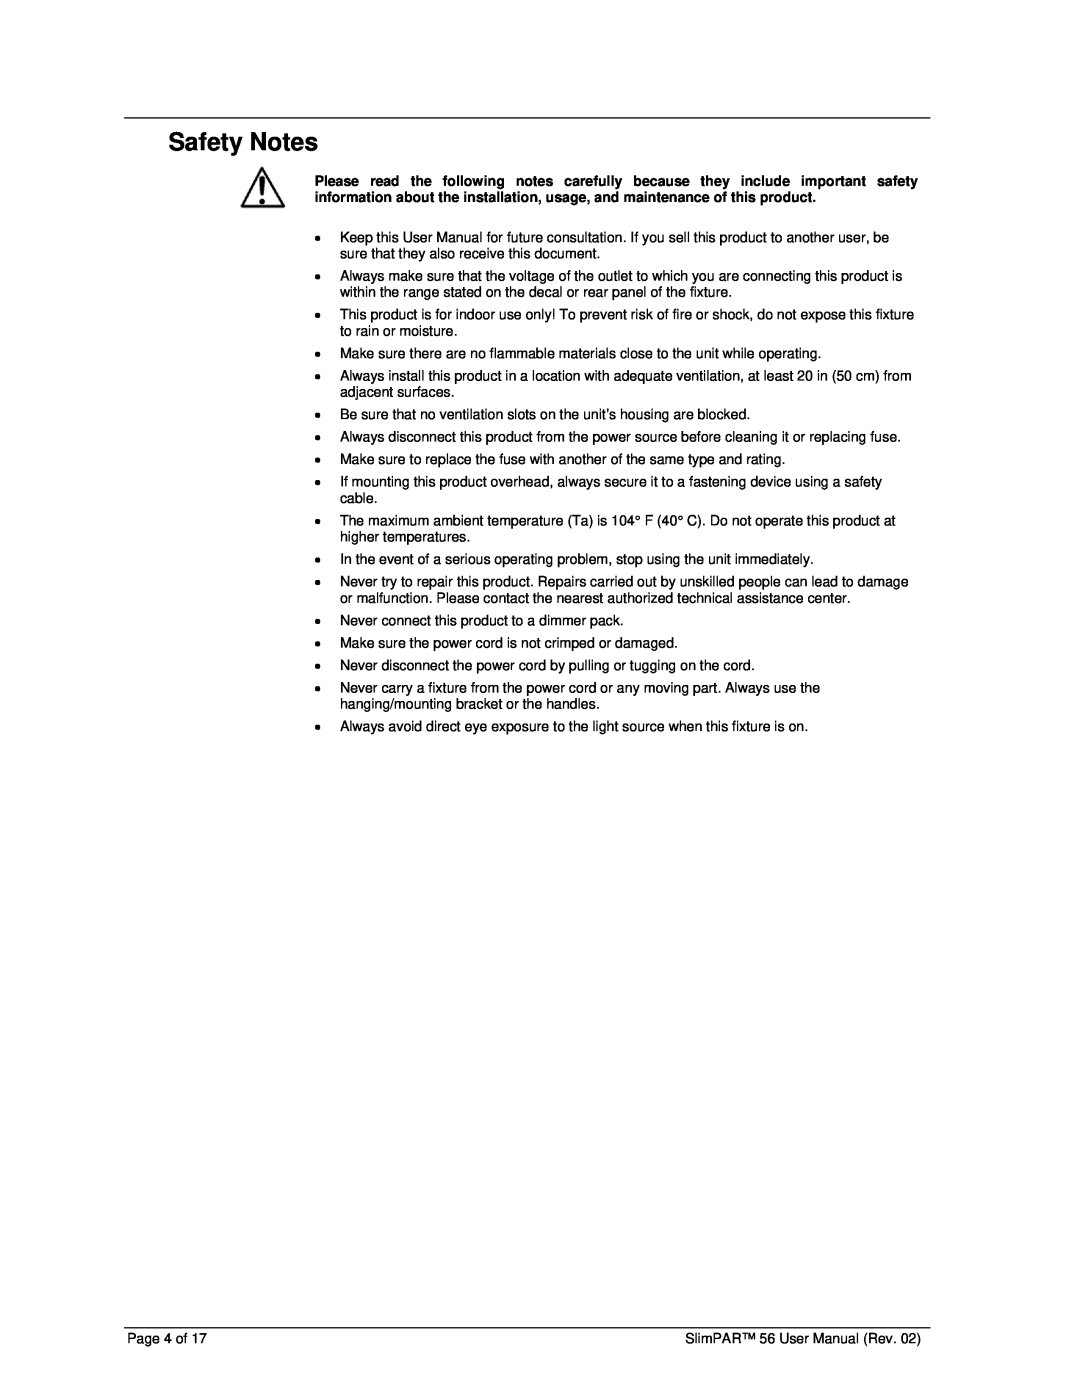 Chauvet 56 user manual Safety Notes 